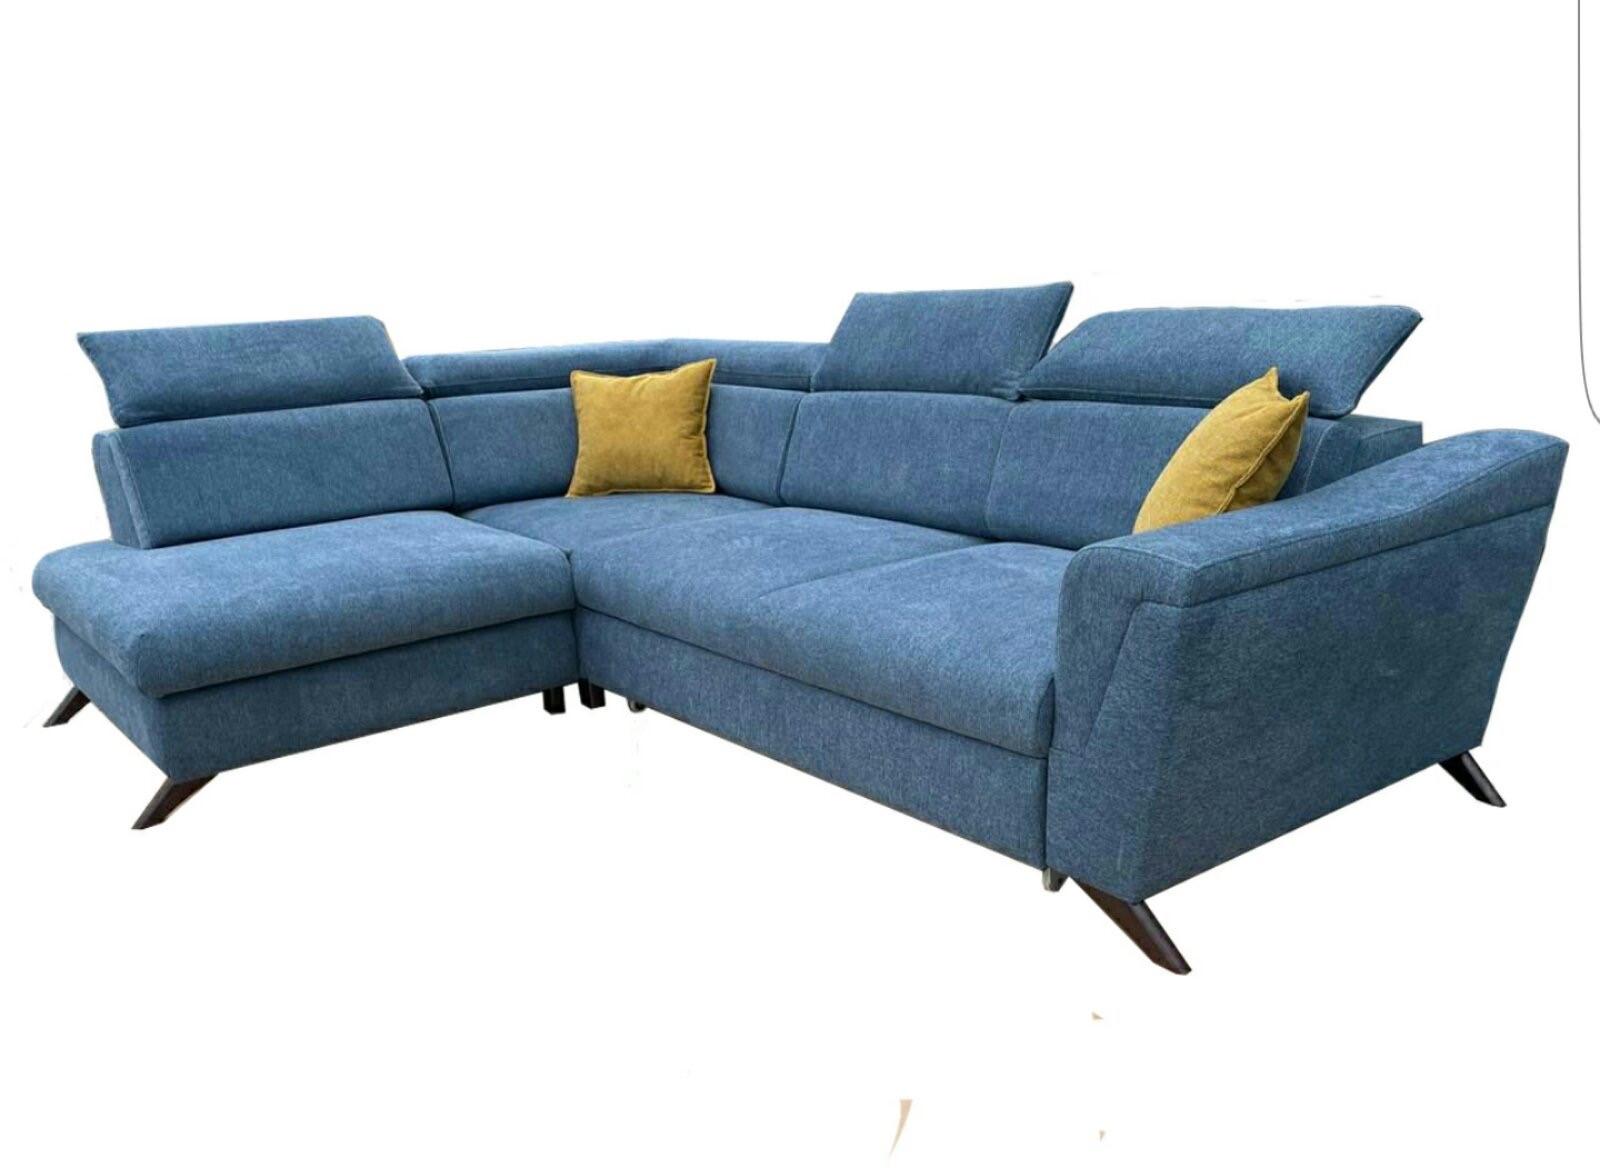   GALASECTIONAL  